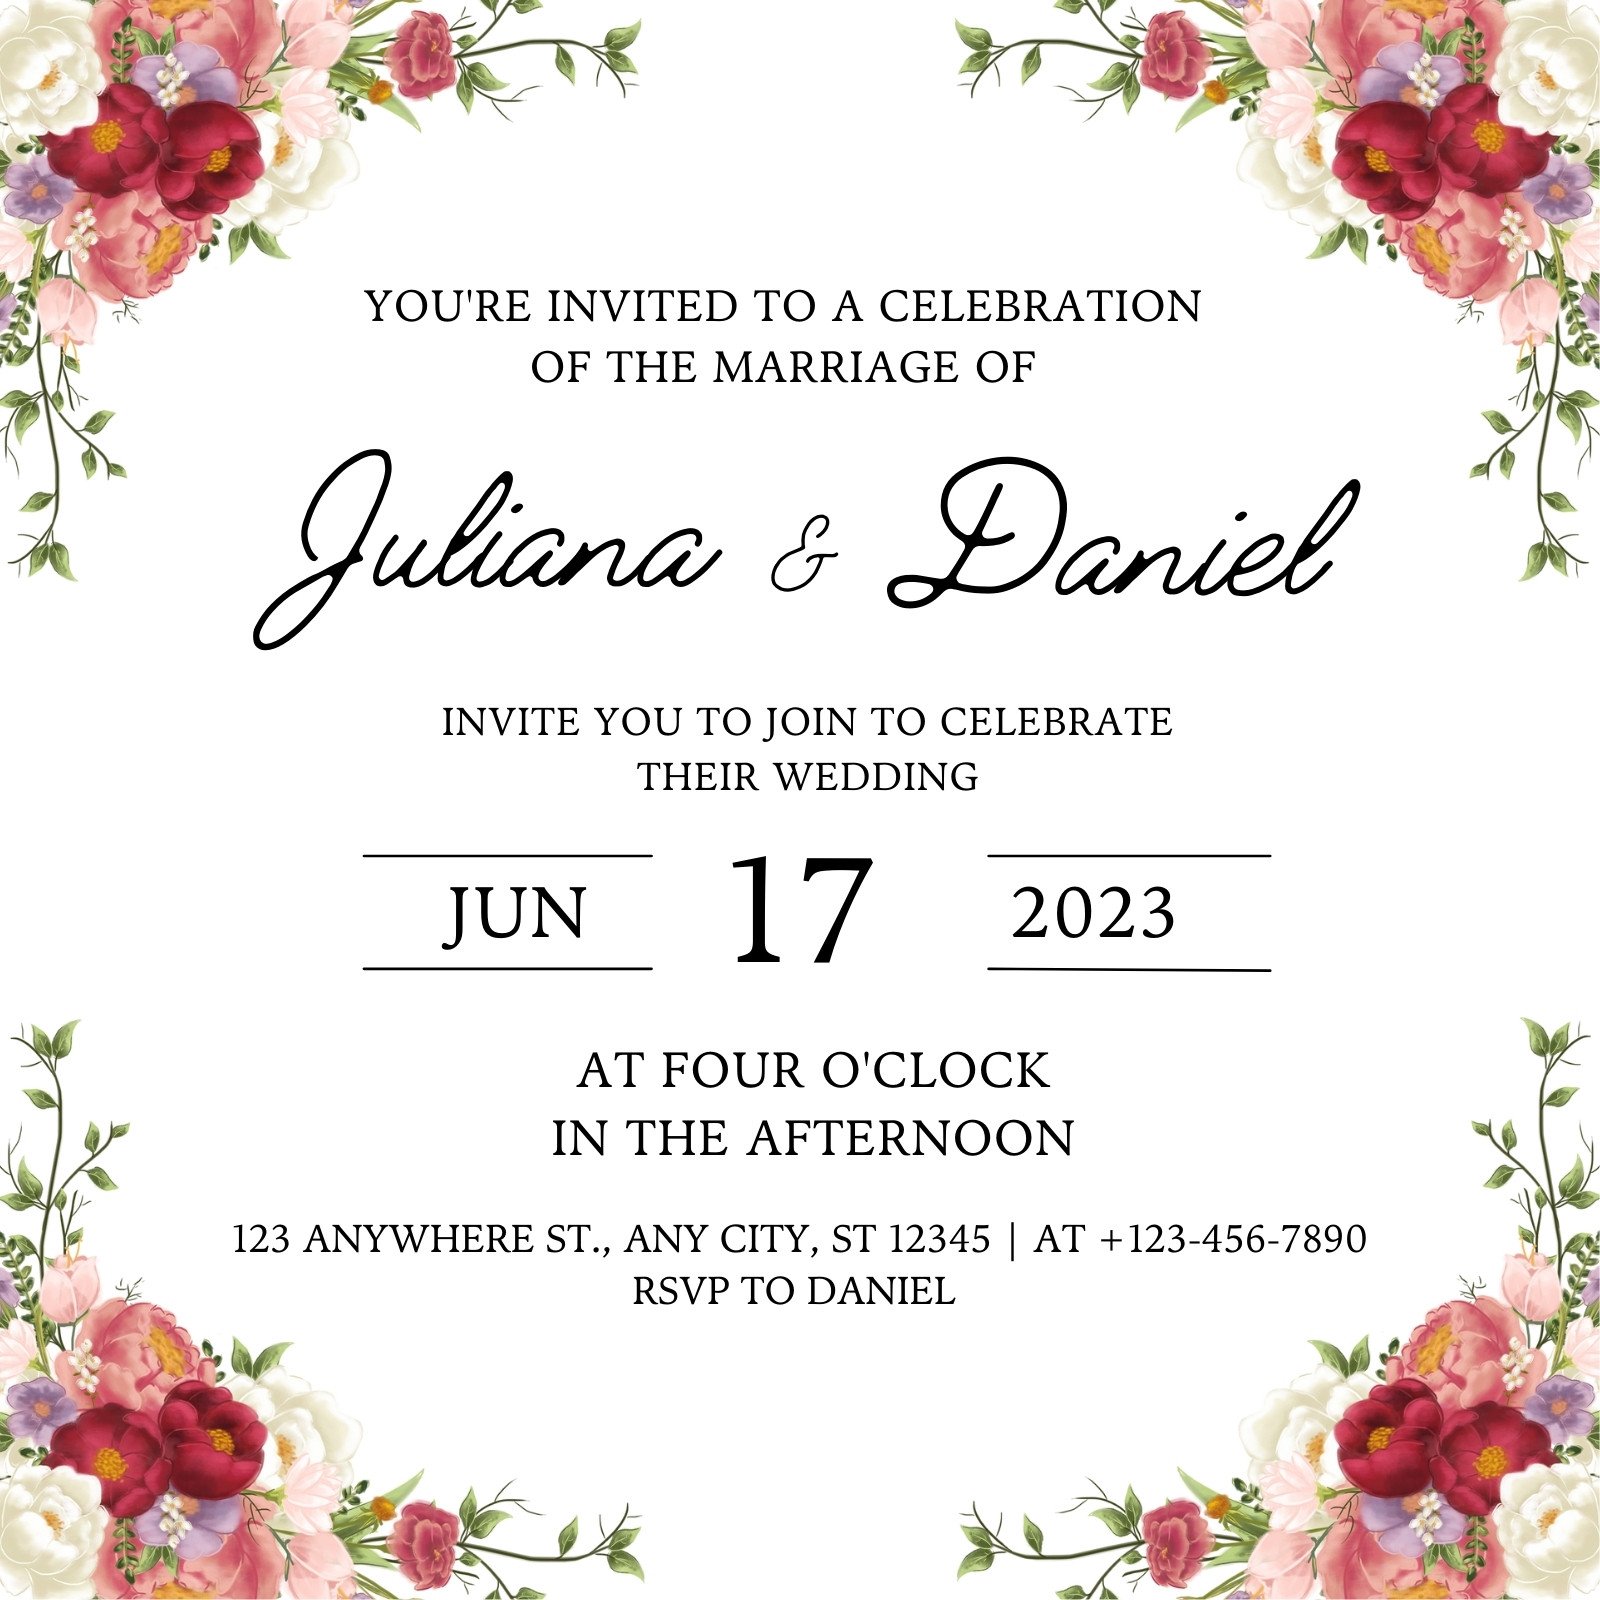 Wedding invitation templates to customize for free | Canva